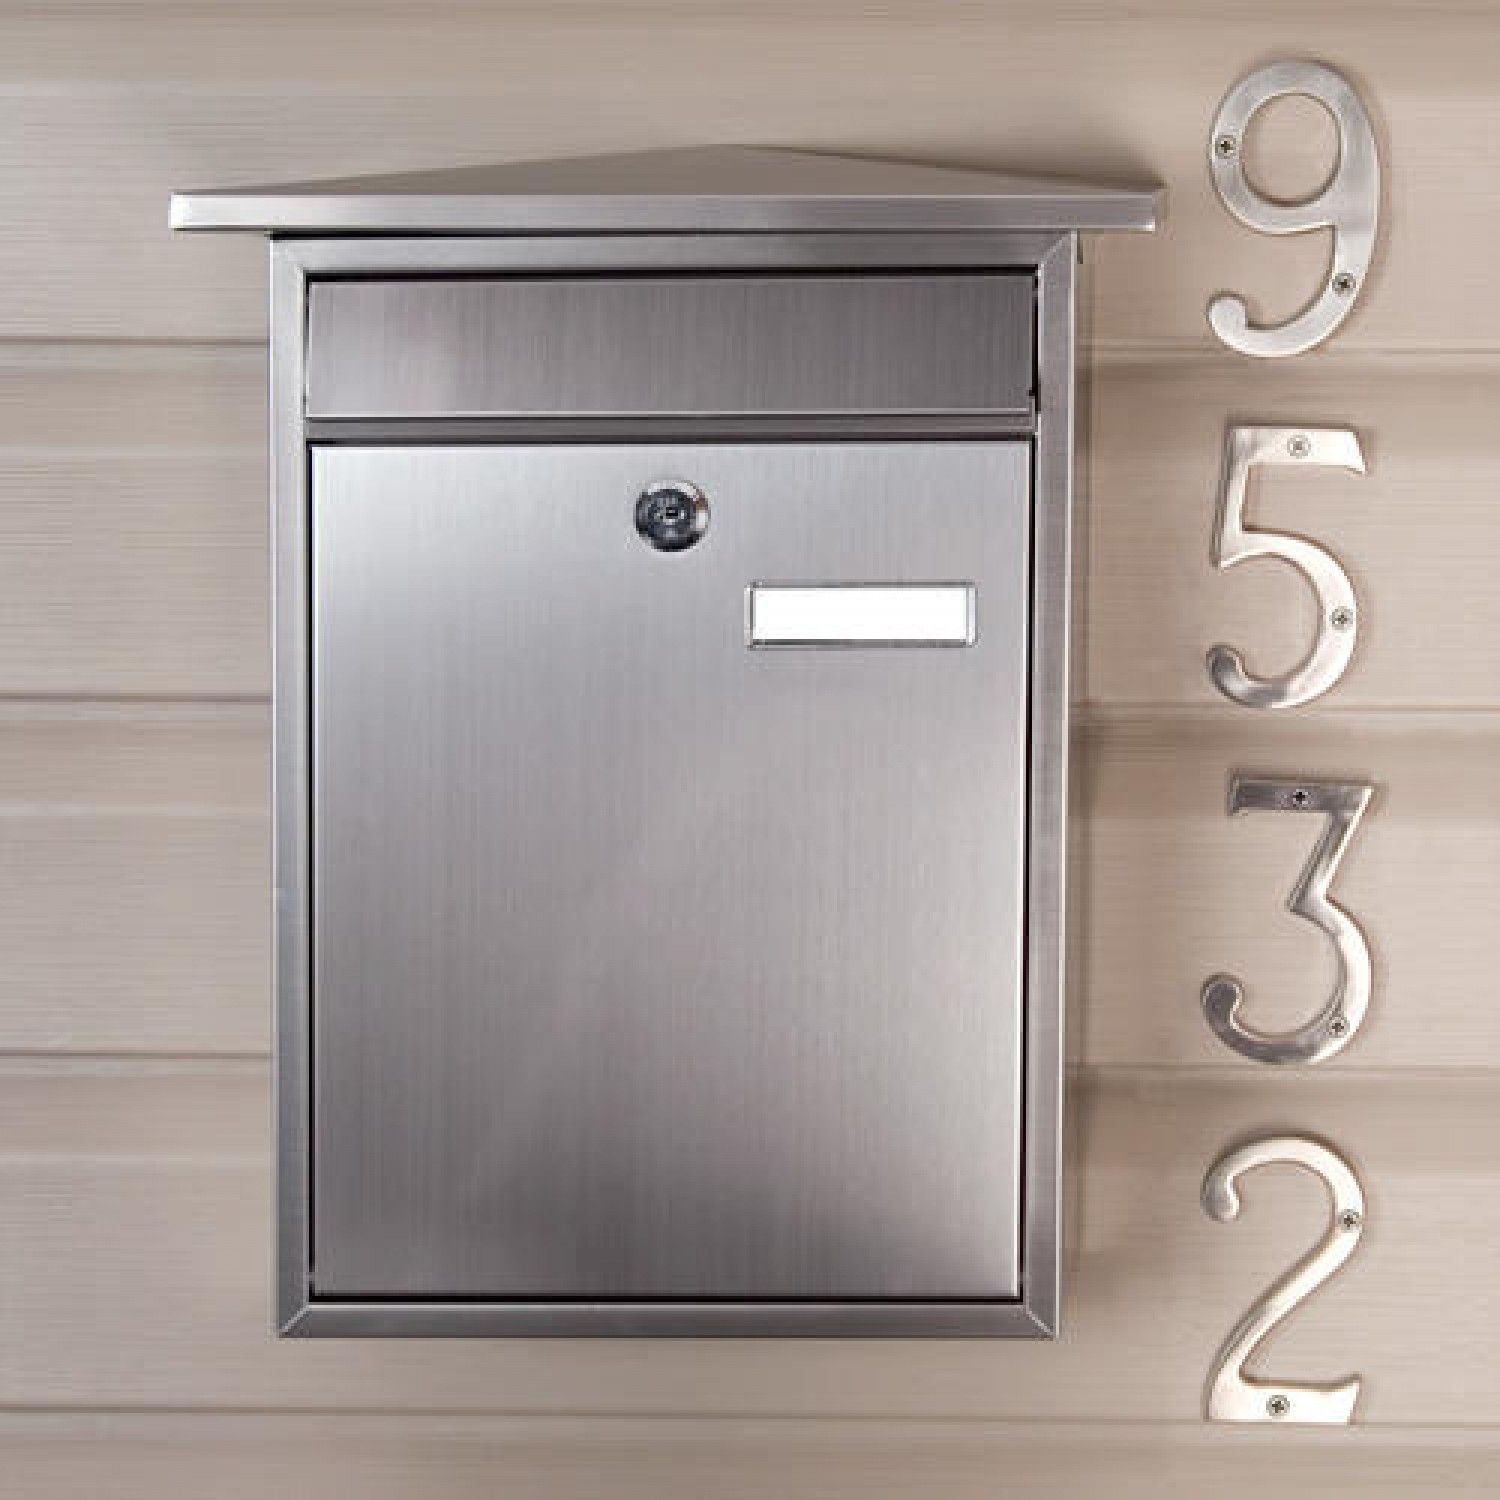 Home outdoor home locking wall mount mailbox stainless steel 1